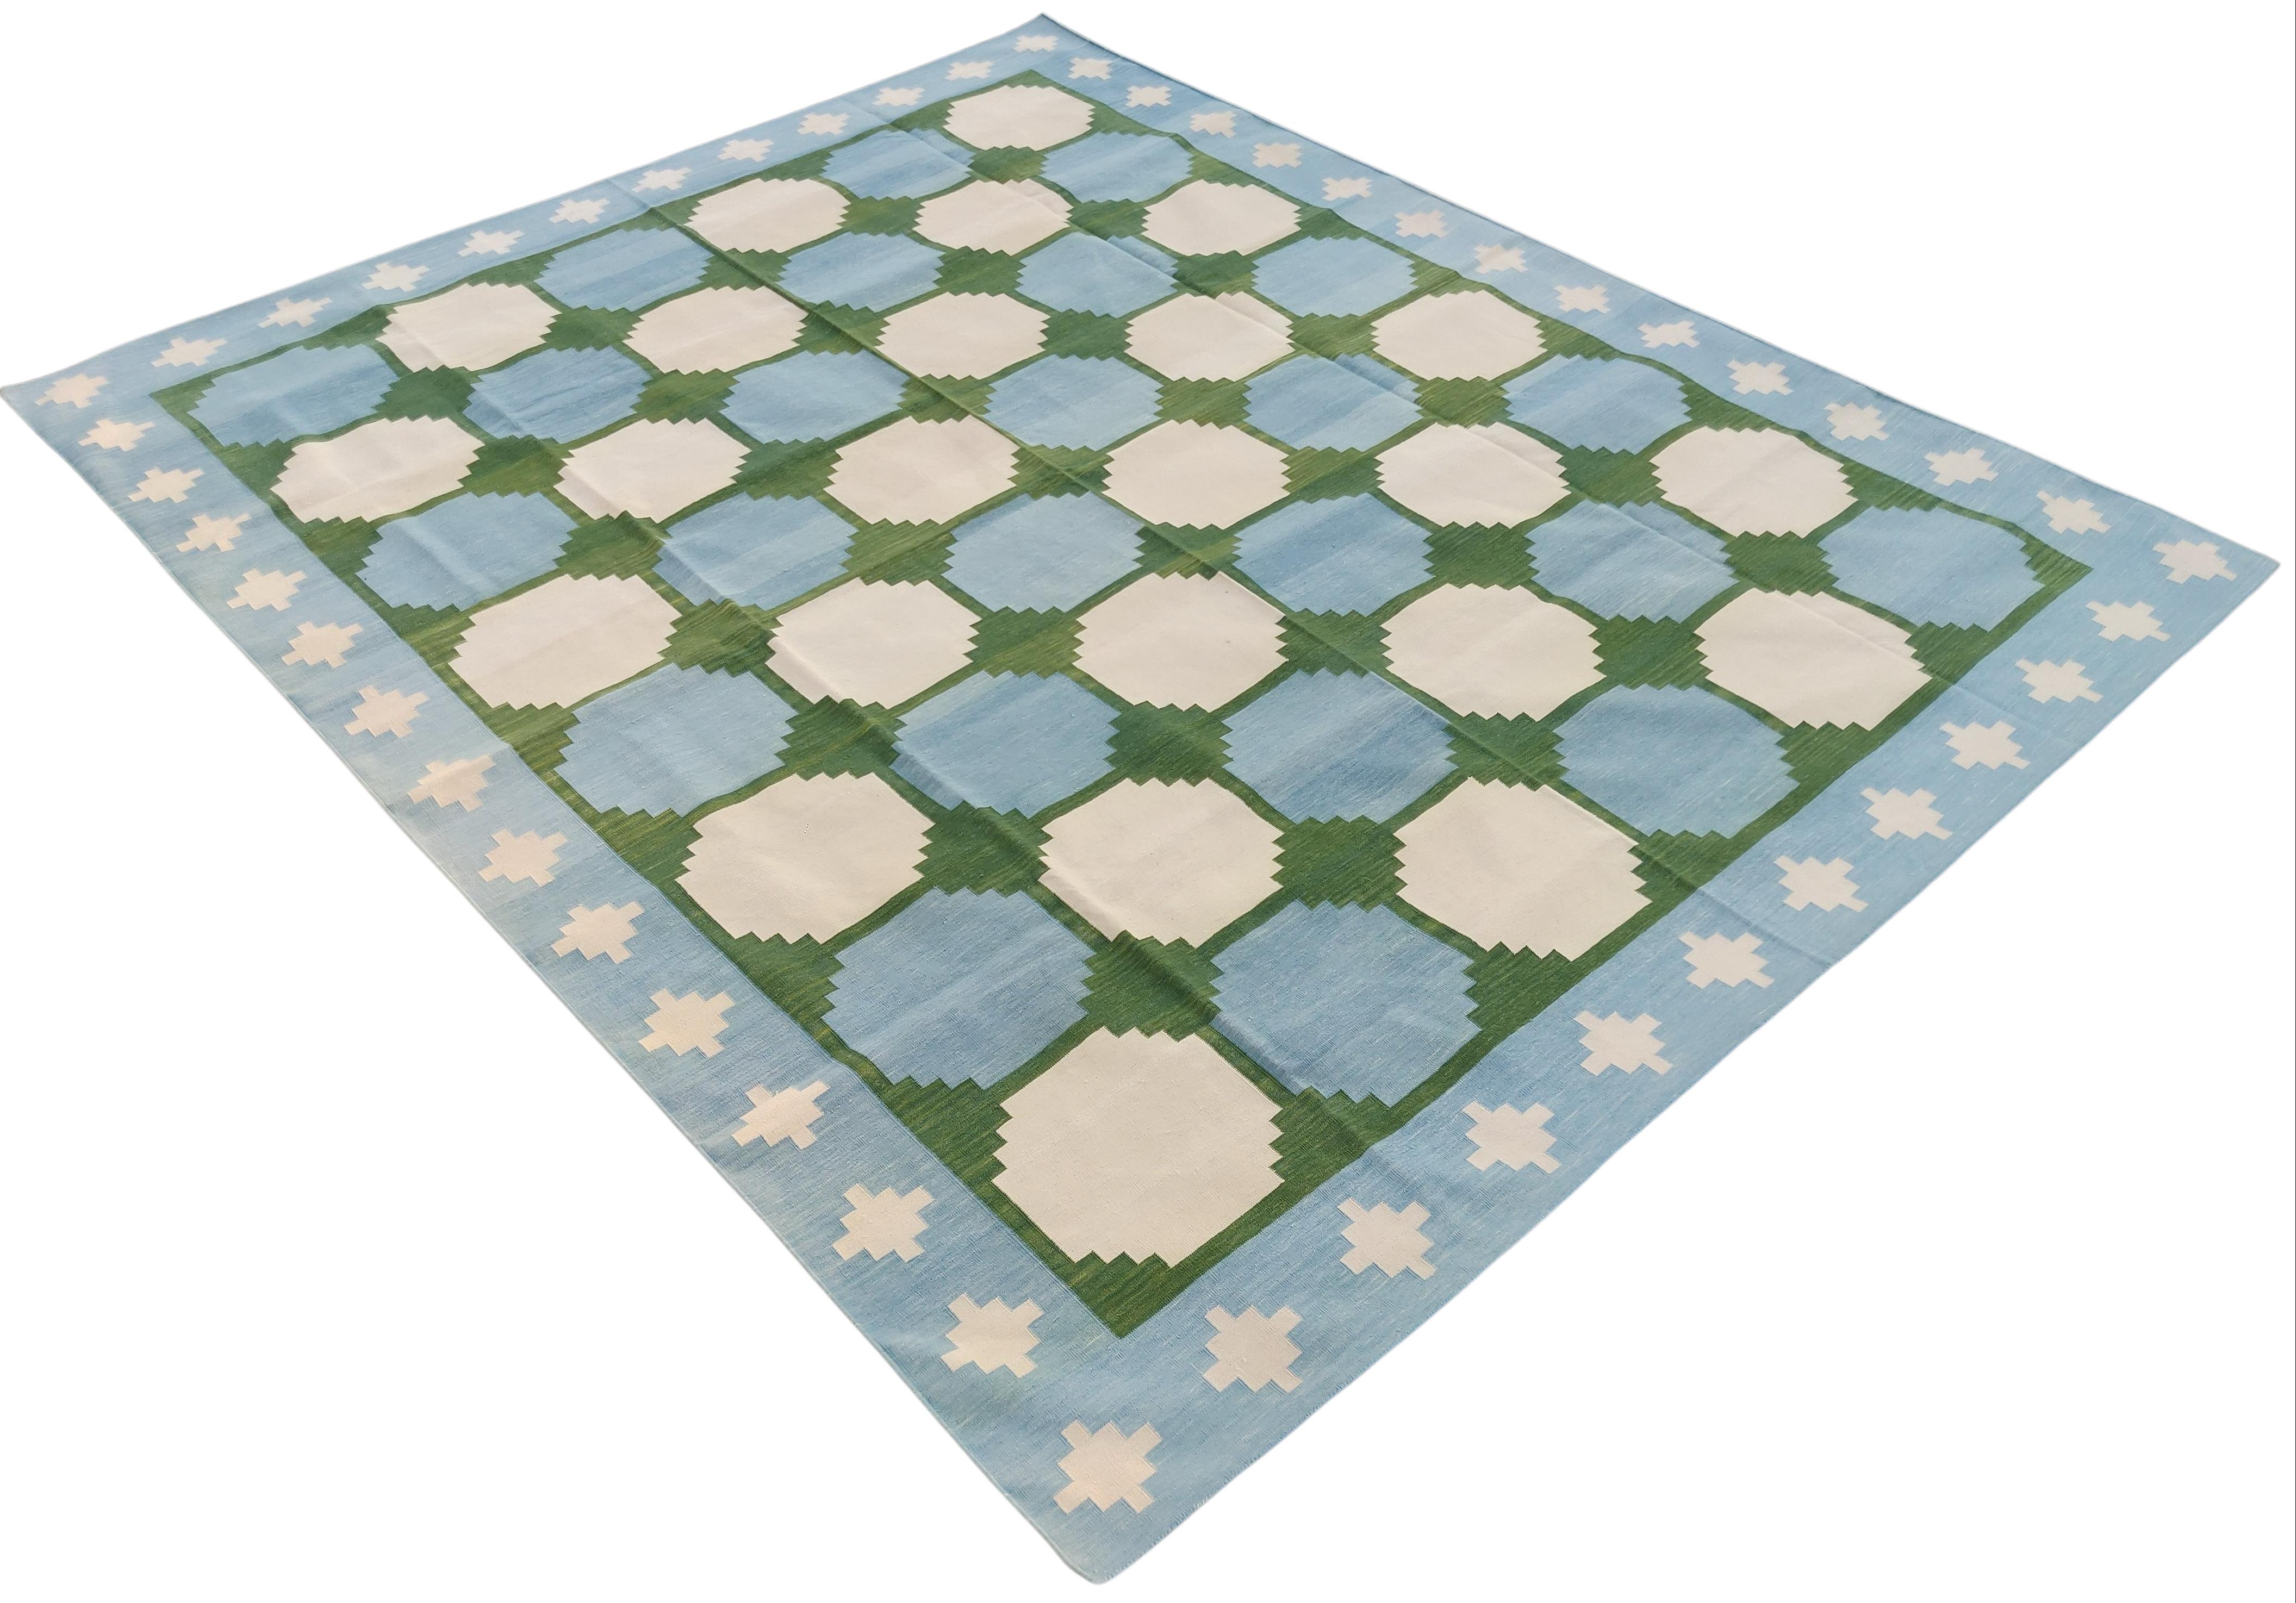 Cotton Natural Vegetable Dyed Forest Green , Sky Blue And Cream Tile Patterned Rug-8'x10'
These special flat-weave dhurries are hand-woven with 15 ply 100% cotton yarn. Due to the special manufacturing techniques used to create our rugs, the size